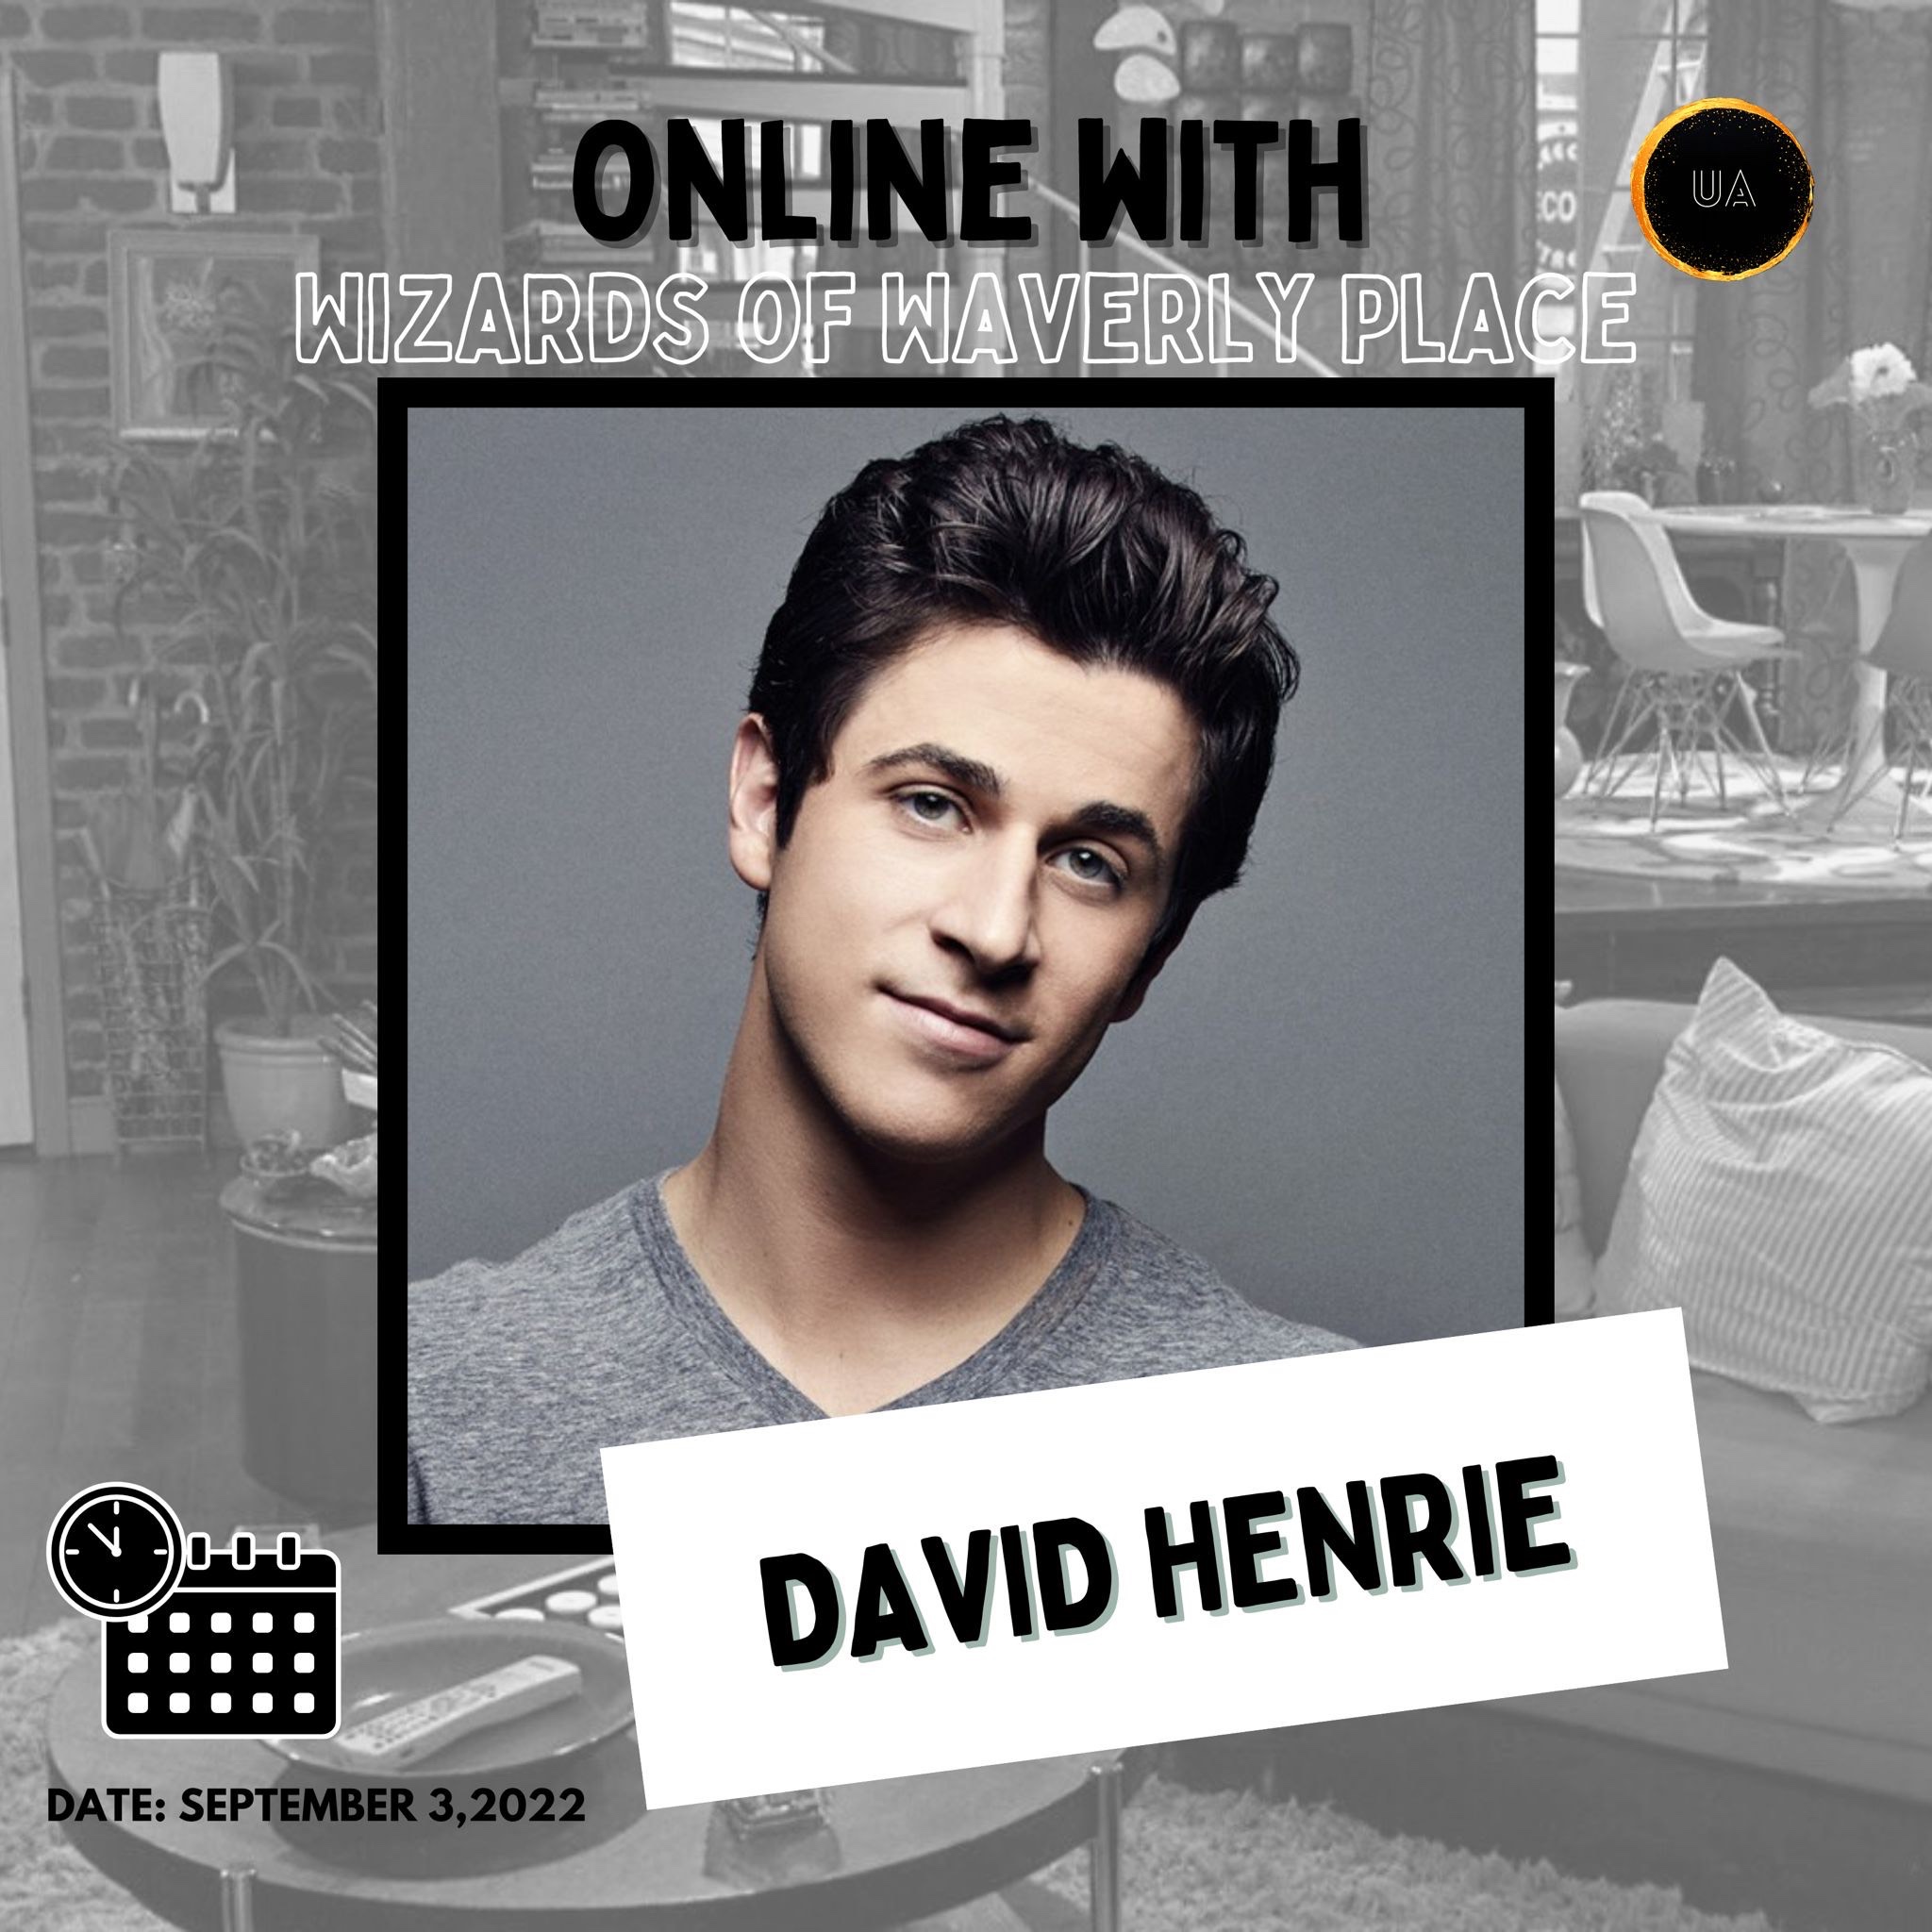 Online with David Henrie